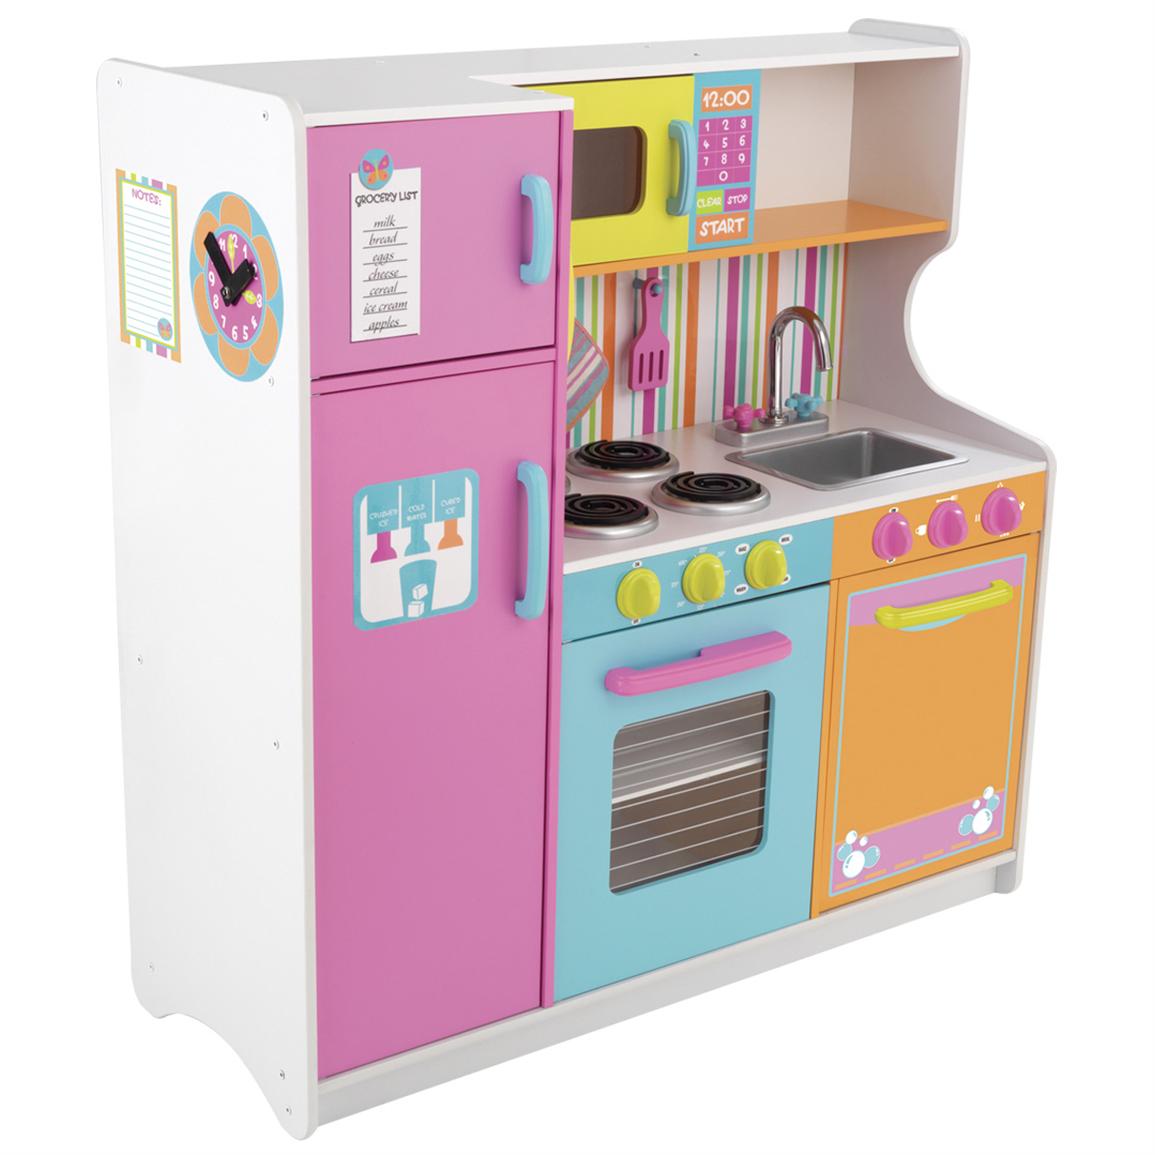 KidKraft Deluxe Big & Bright Kitchen 146108, Toys at Sportsman's Guide